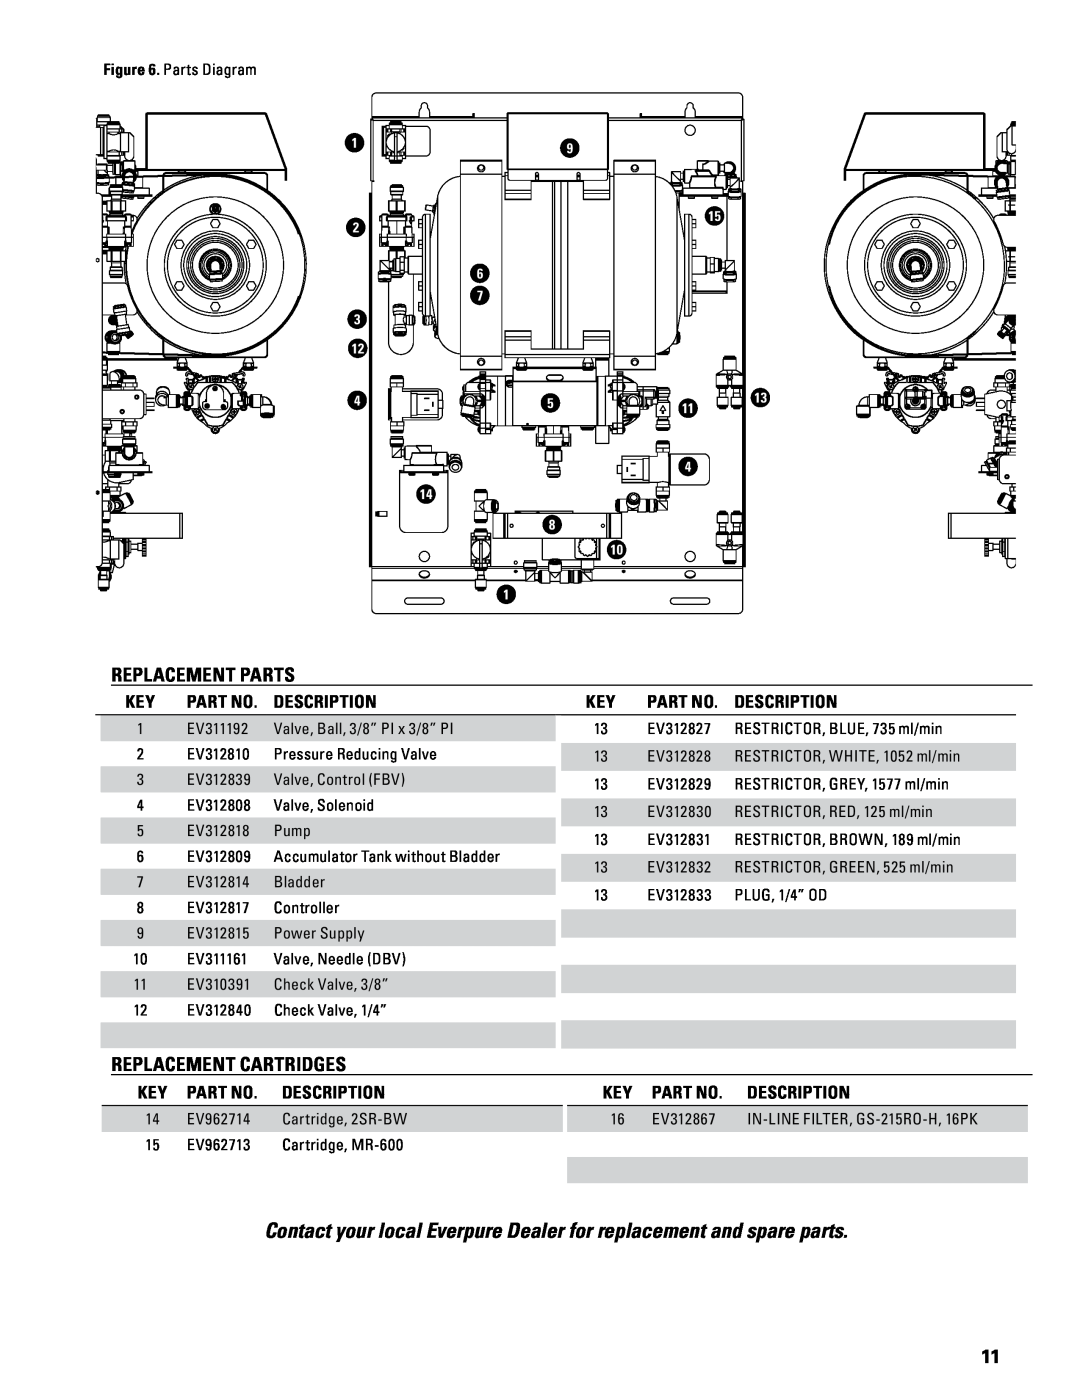 Everpure ENVI-RO Contact your local Everpure Dealer for replacement and spare parts, Replacement Parts, Parts Diagram 